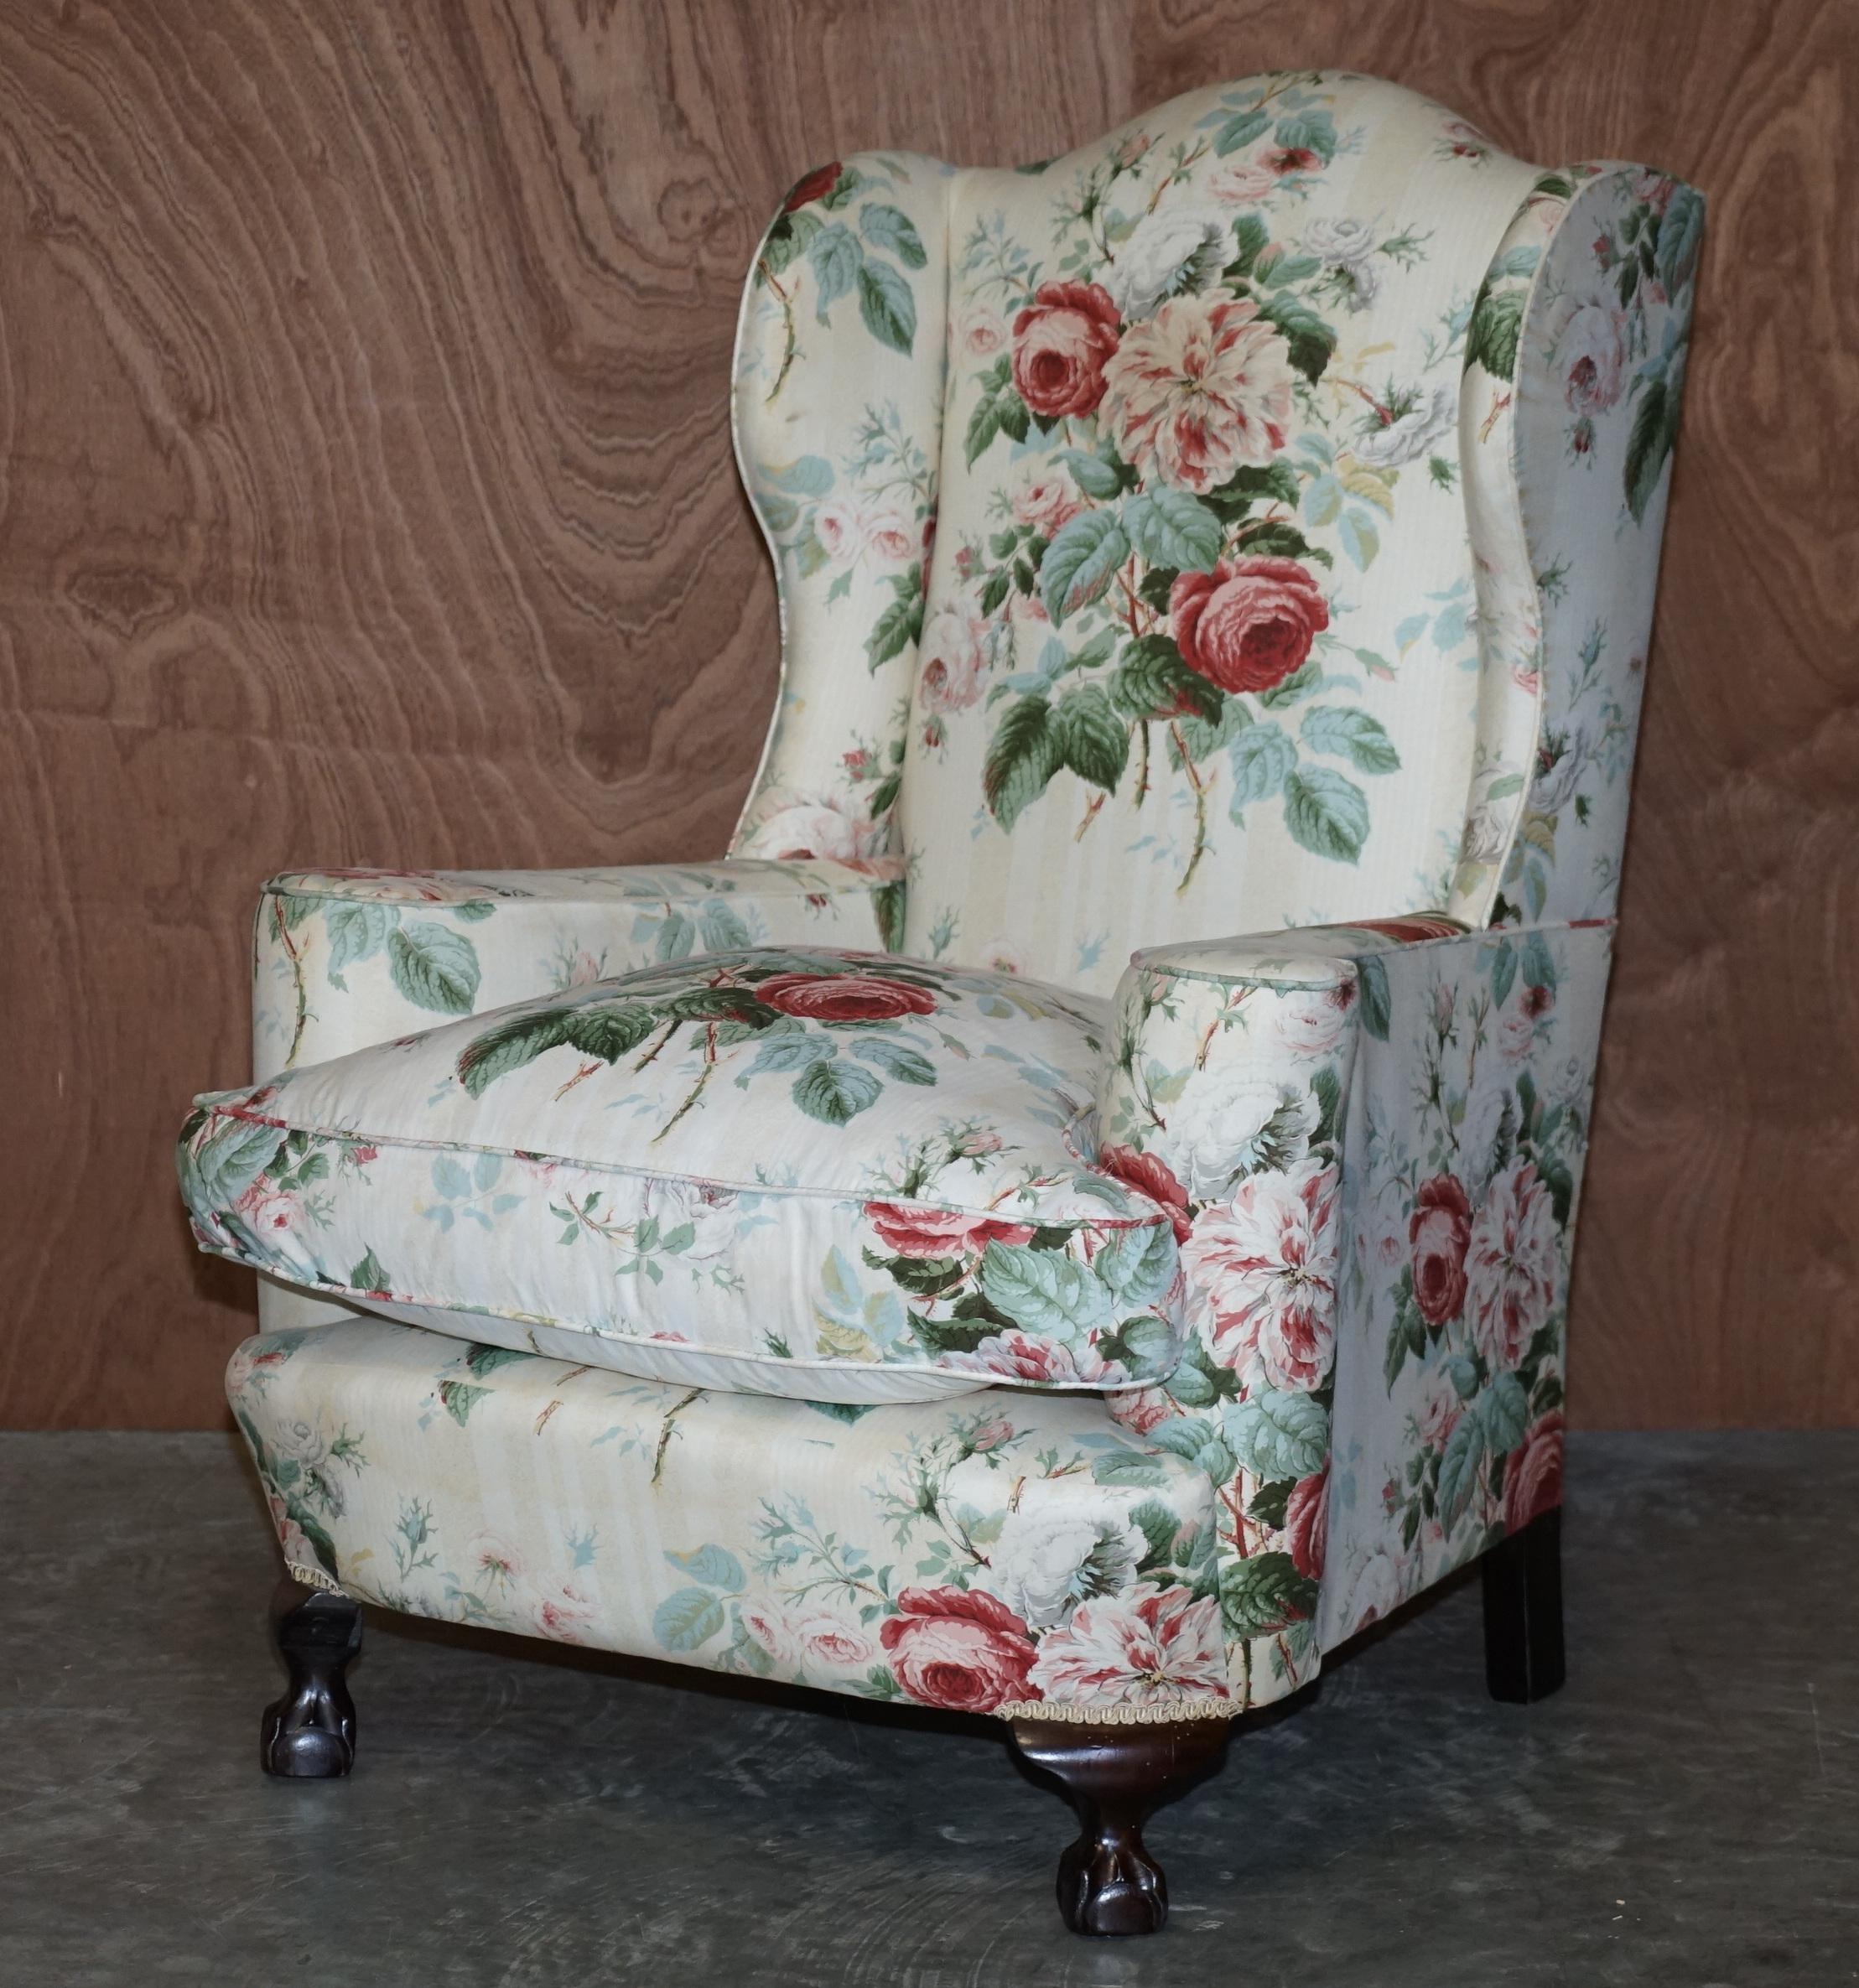 We are delighted to offer for sale this lovely pair of Colexfax & Fowler floral upholstered Victorian armchairs

A very good looking and well made his & her’s pair, the first chair is a tall wingaback with mahogany frame and Claw & Ball feet, it